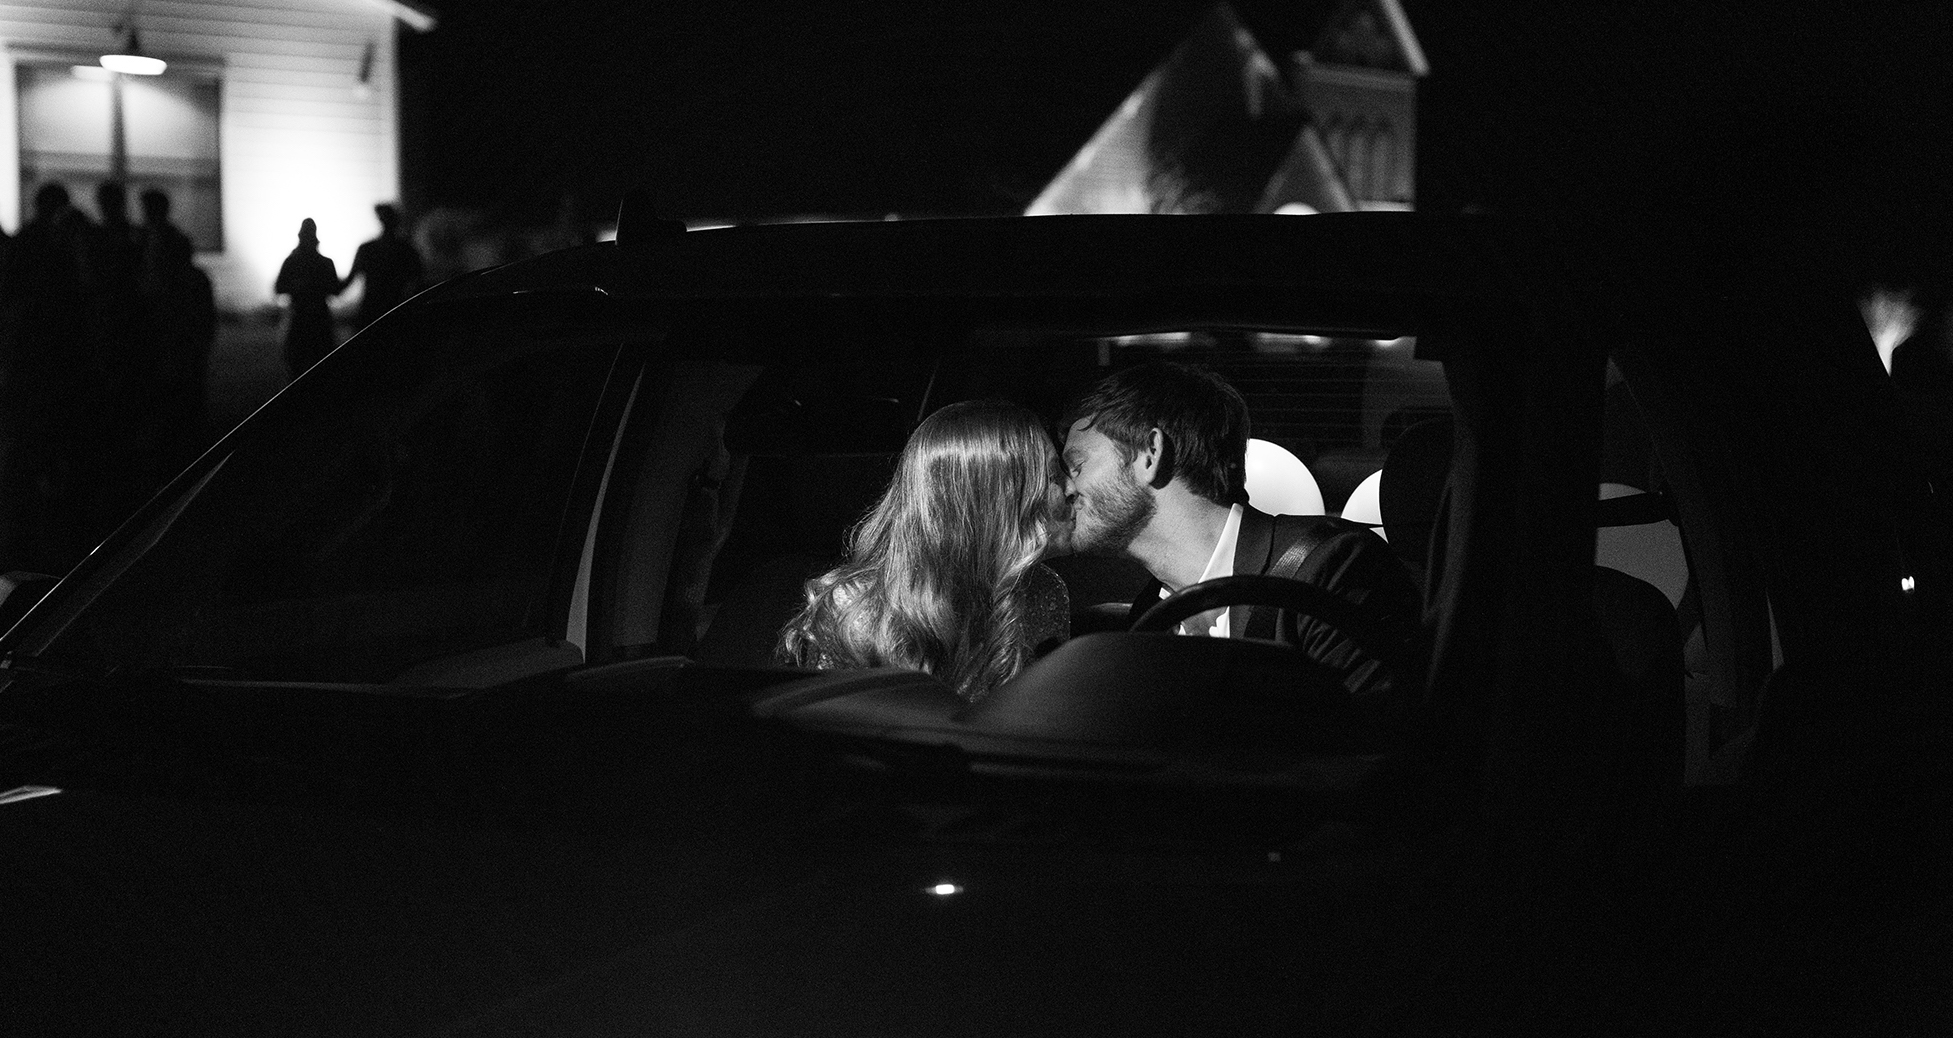 The bride and groom kiss in the car as they drive away from their wedding.